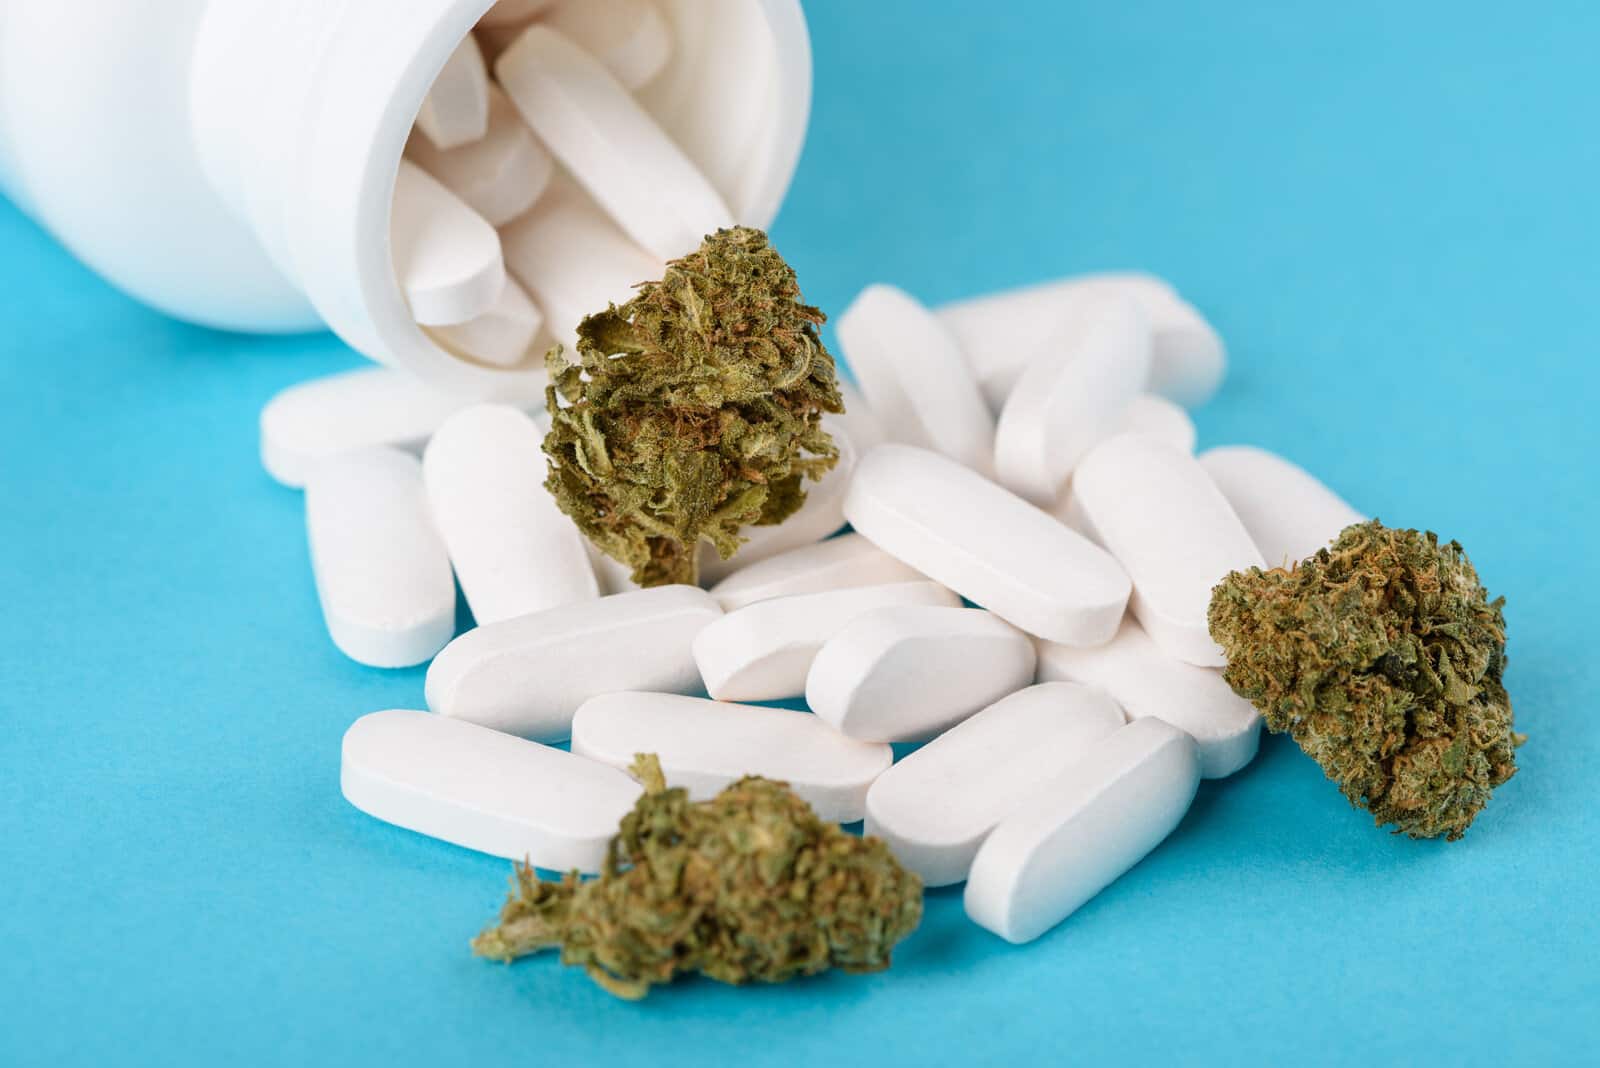 Percocet and Marijuana Side Effects